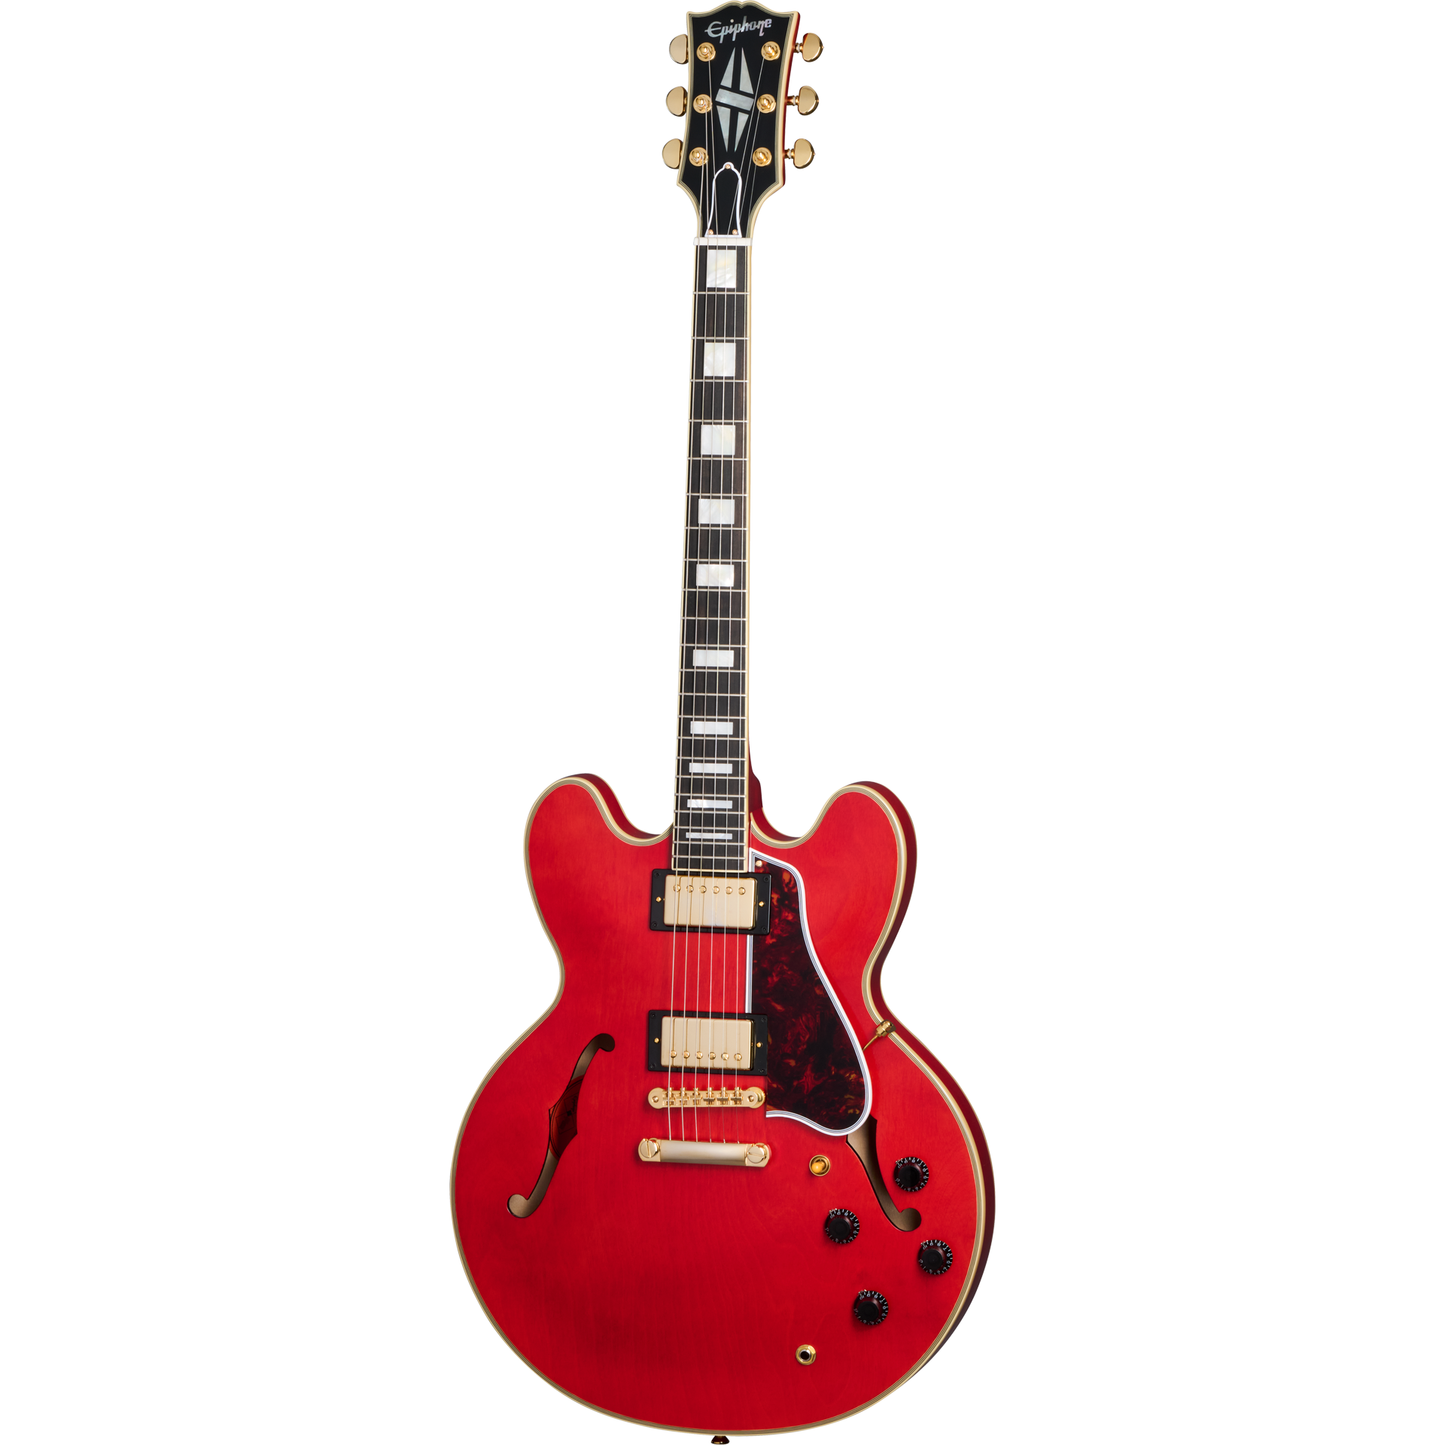 Epiphone 1959 ES-355 Semi Hollow Electric Guitar - Cherry Red